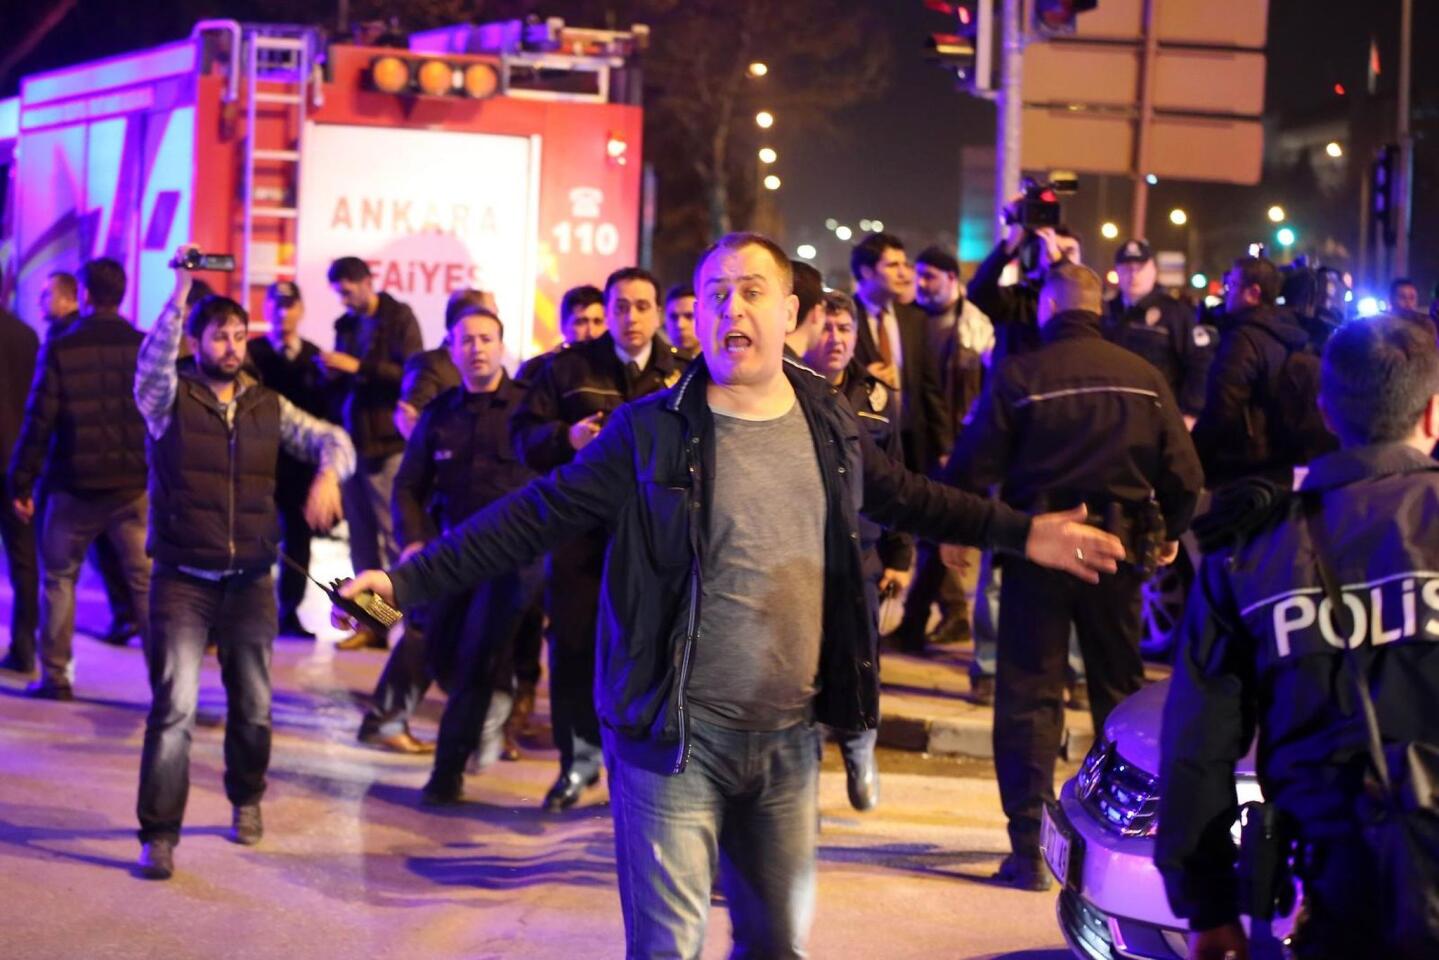 People react at the scene of a car bomb that went off late Wednesday during rush hour in Ankara, Turkey's capital, near a convoy of buses carrying military personnel.